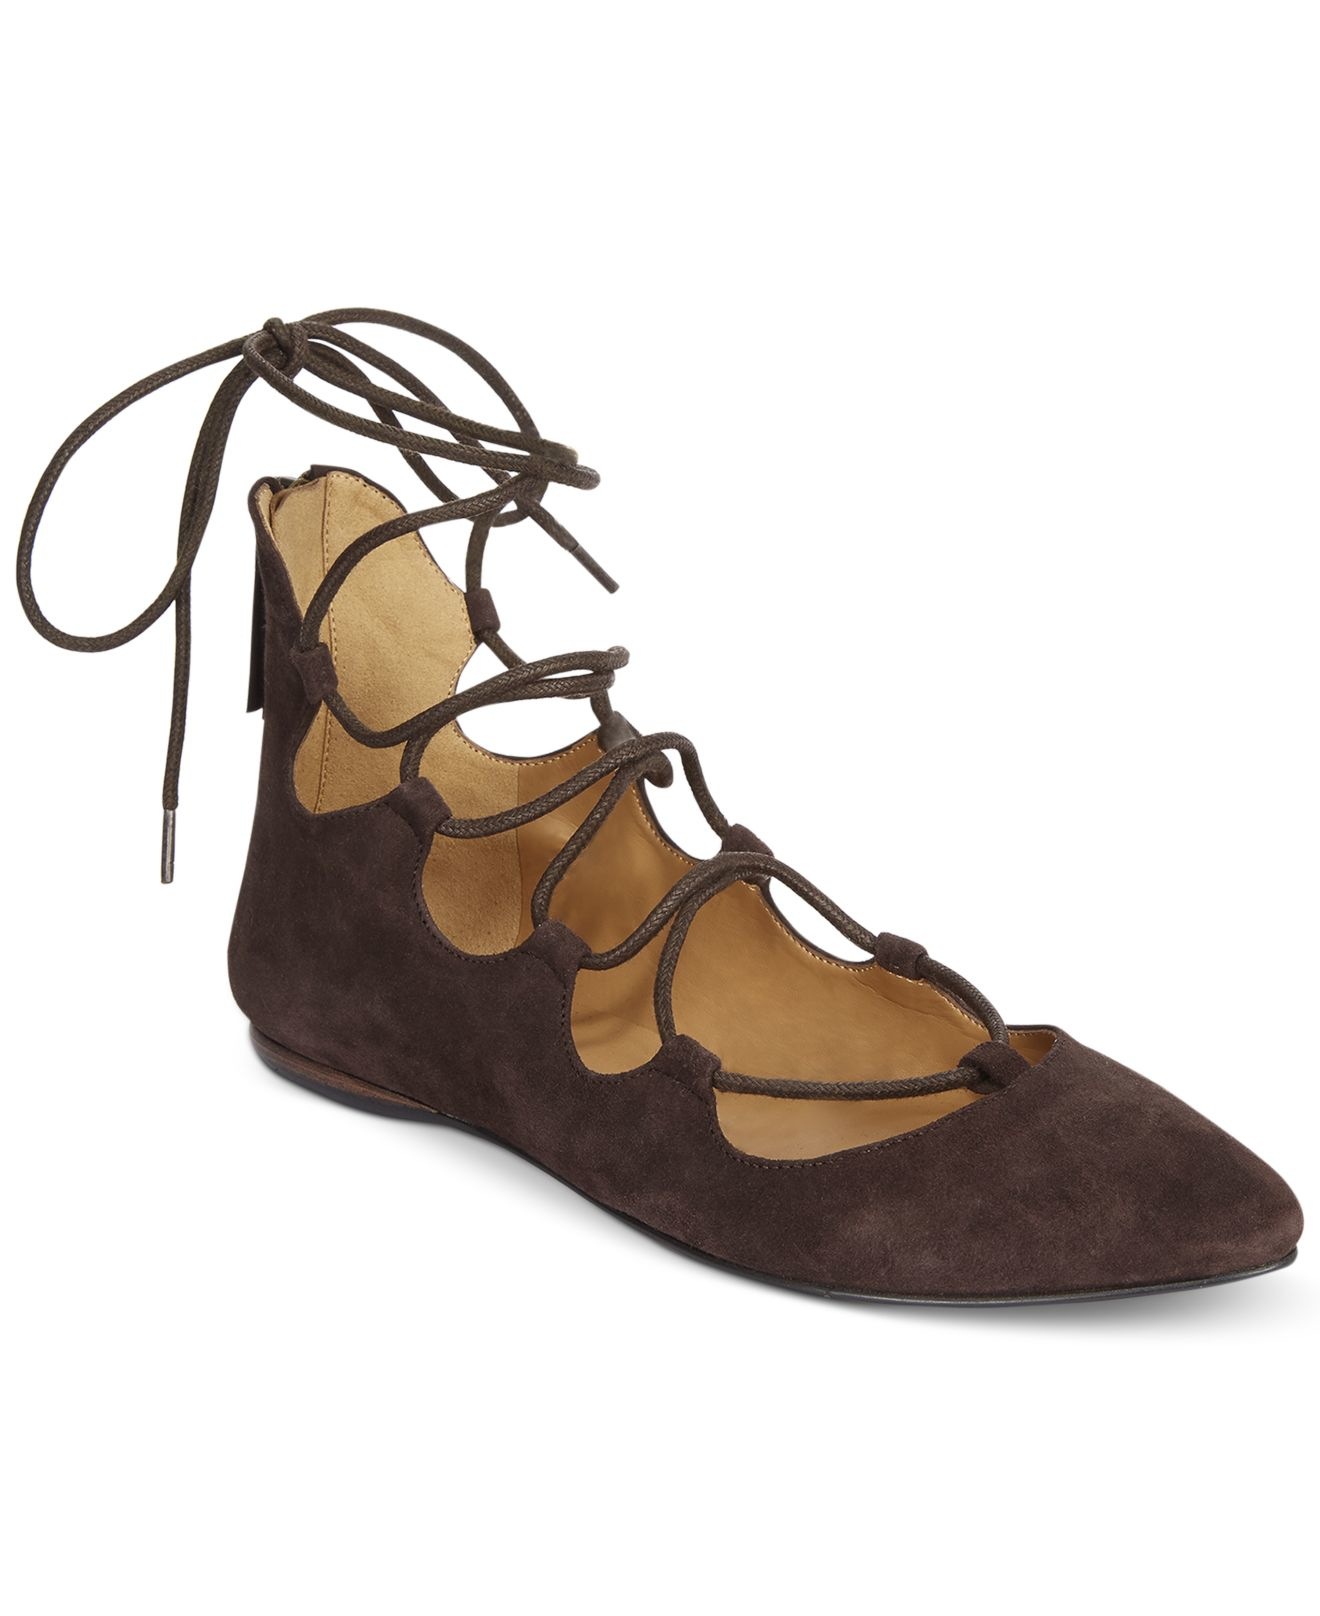 Nine West Suede Signmeup Lace-up Flats in Dark Brown Suede (Brown) - Lyst